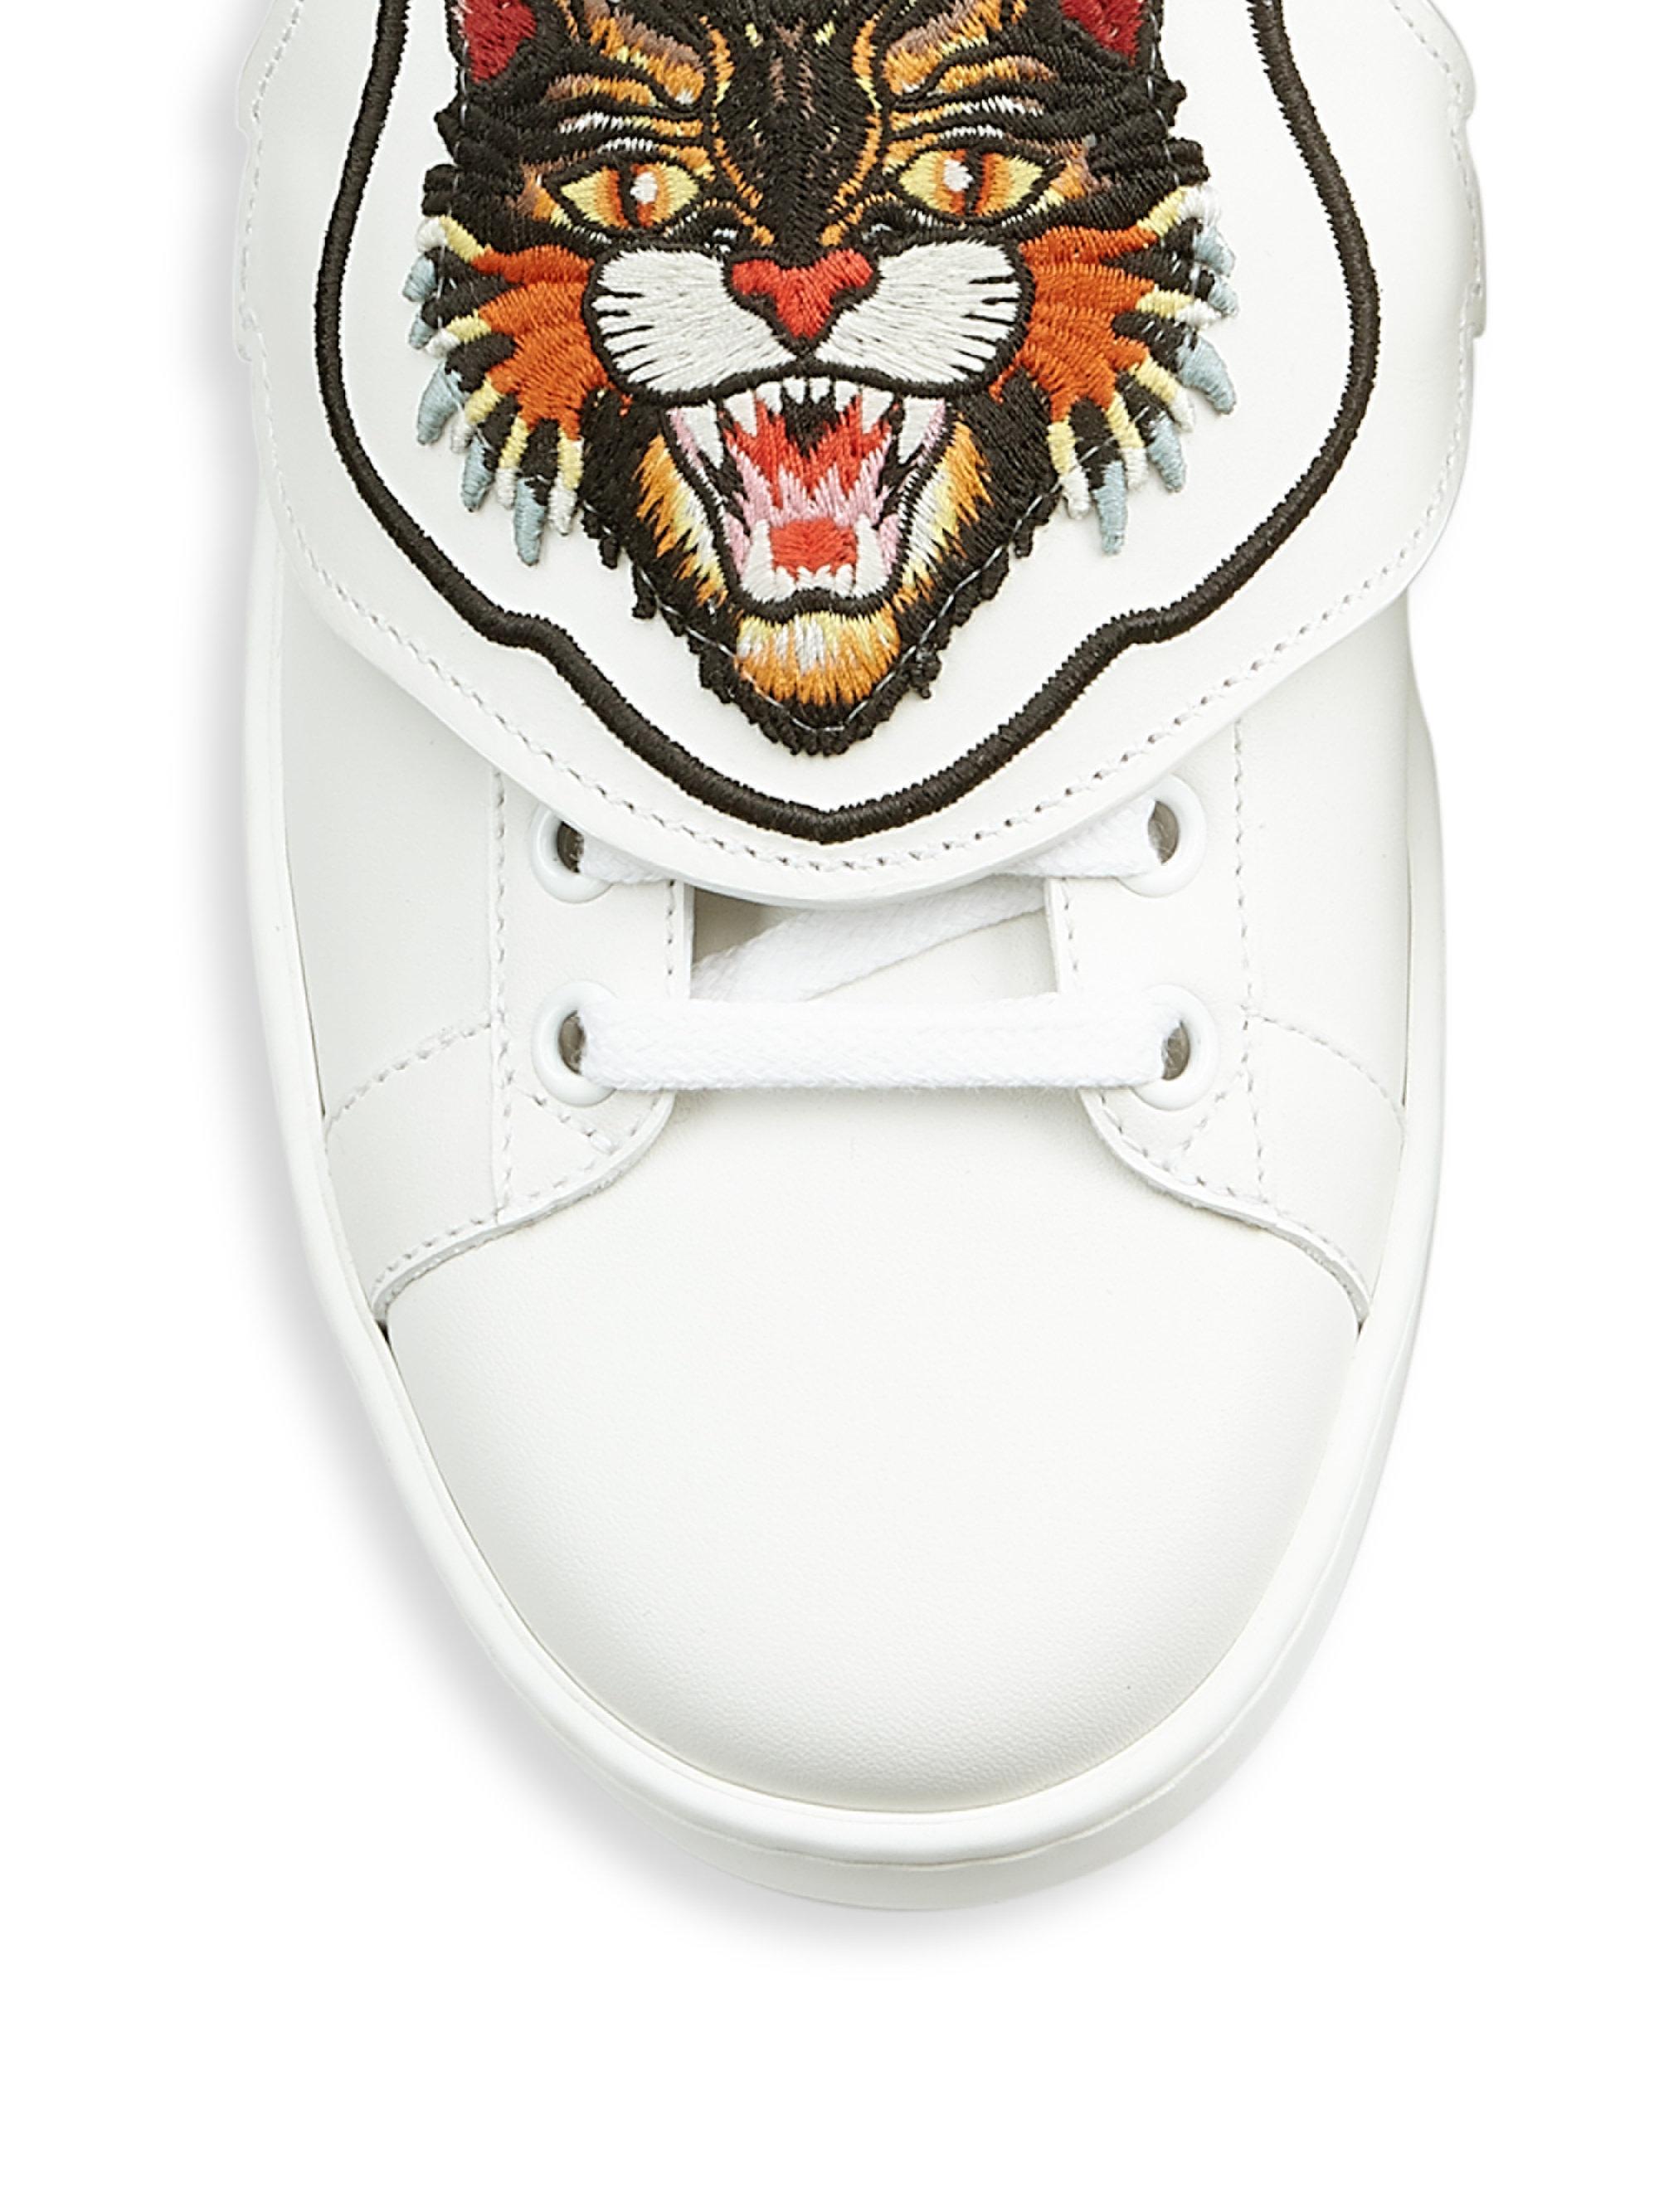 Gucci Ace Patch Sneakers in | Lyst